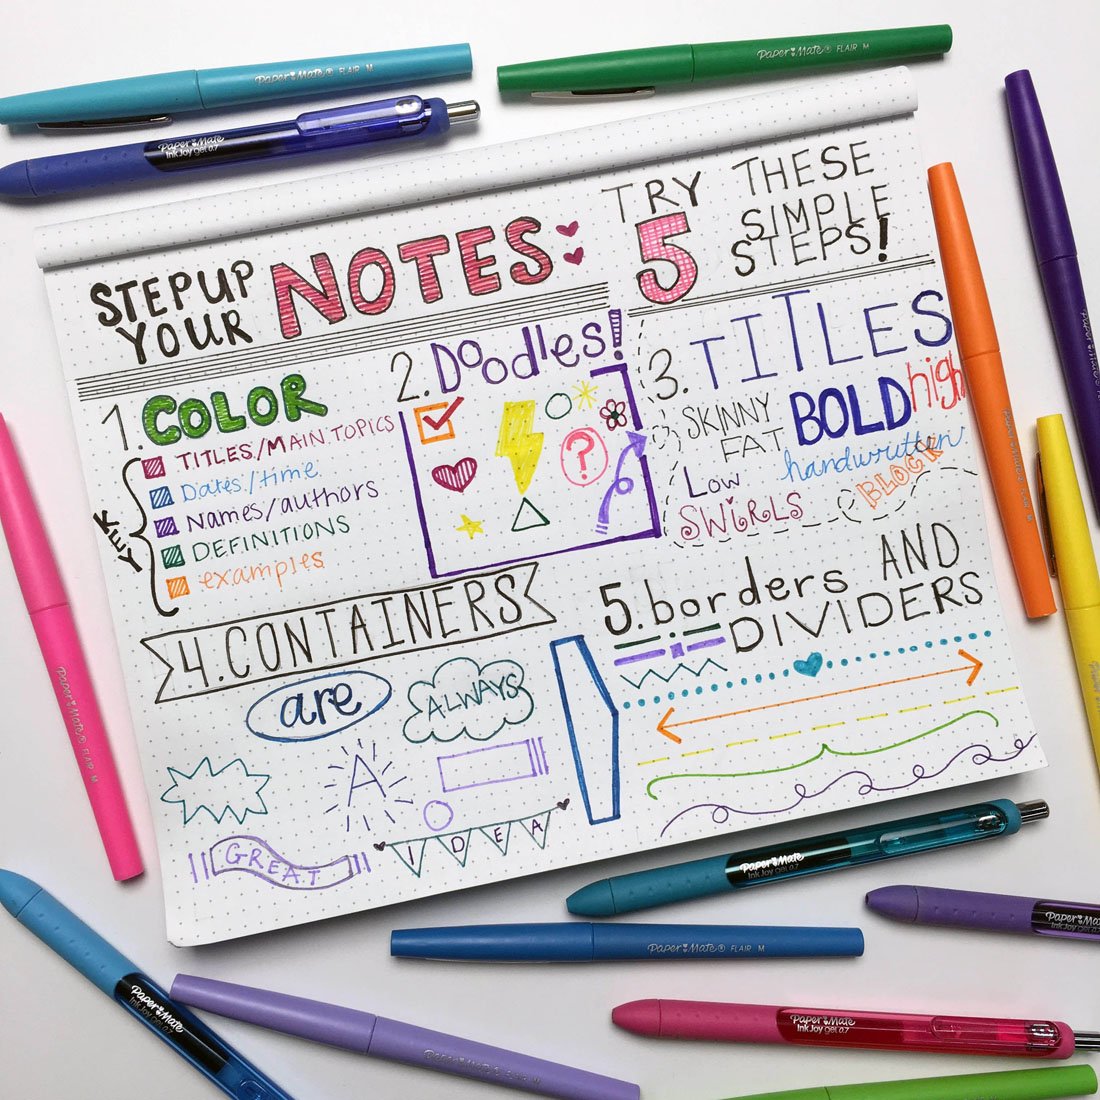 History Note Taking Tips and Tricks - Paper Mate